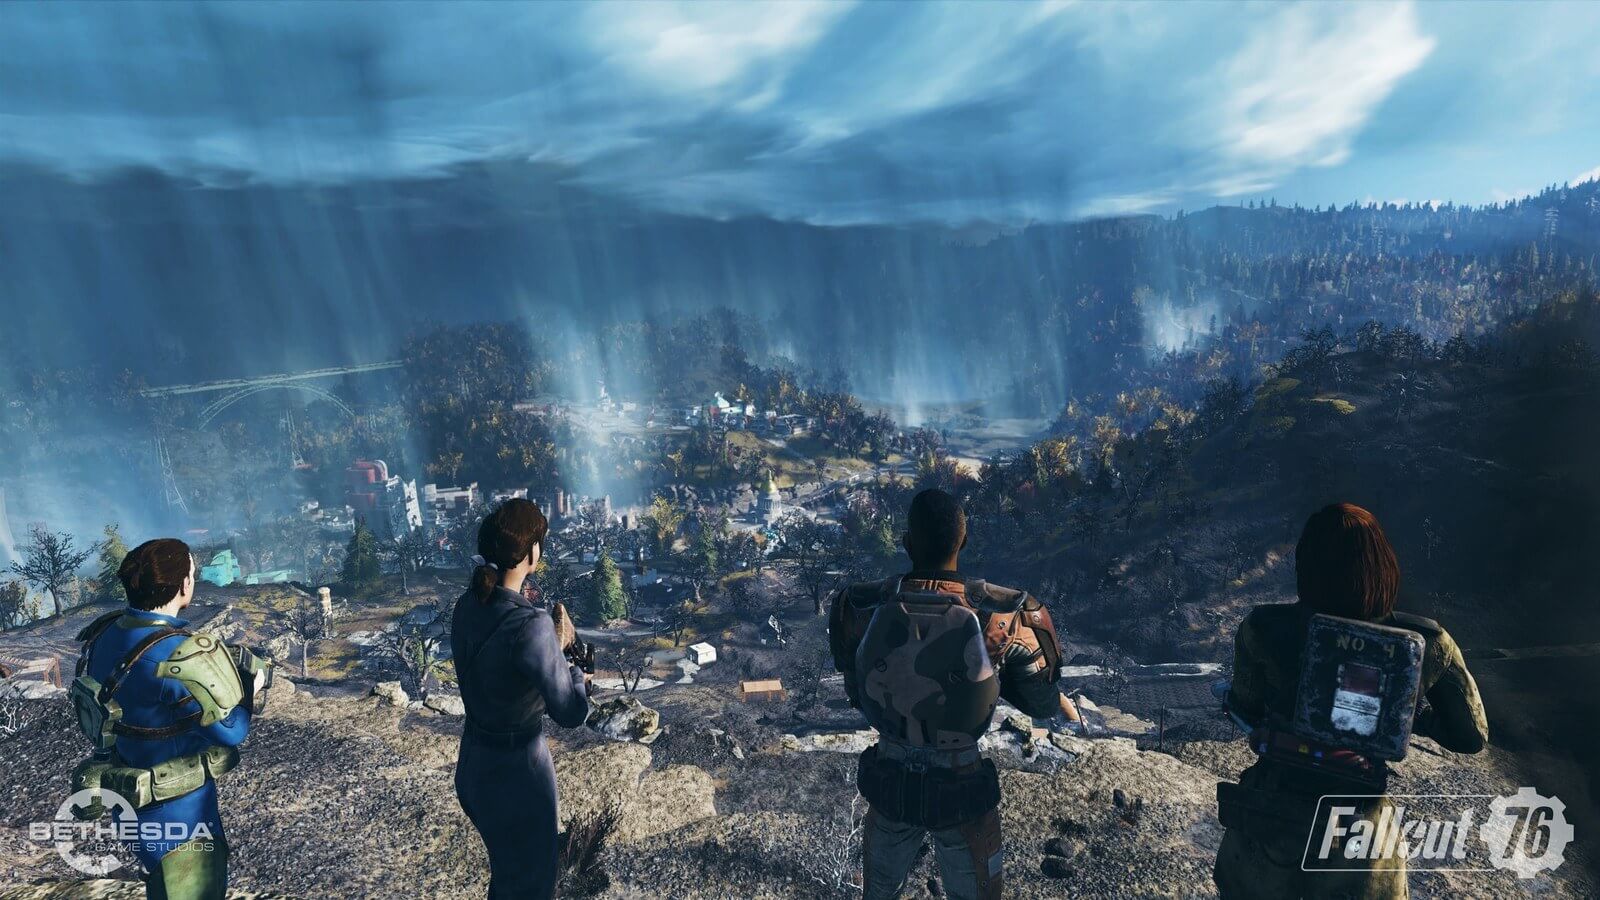 QuakeCon Q&A reveals how Fallout 76 will deal with griefers